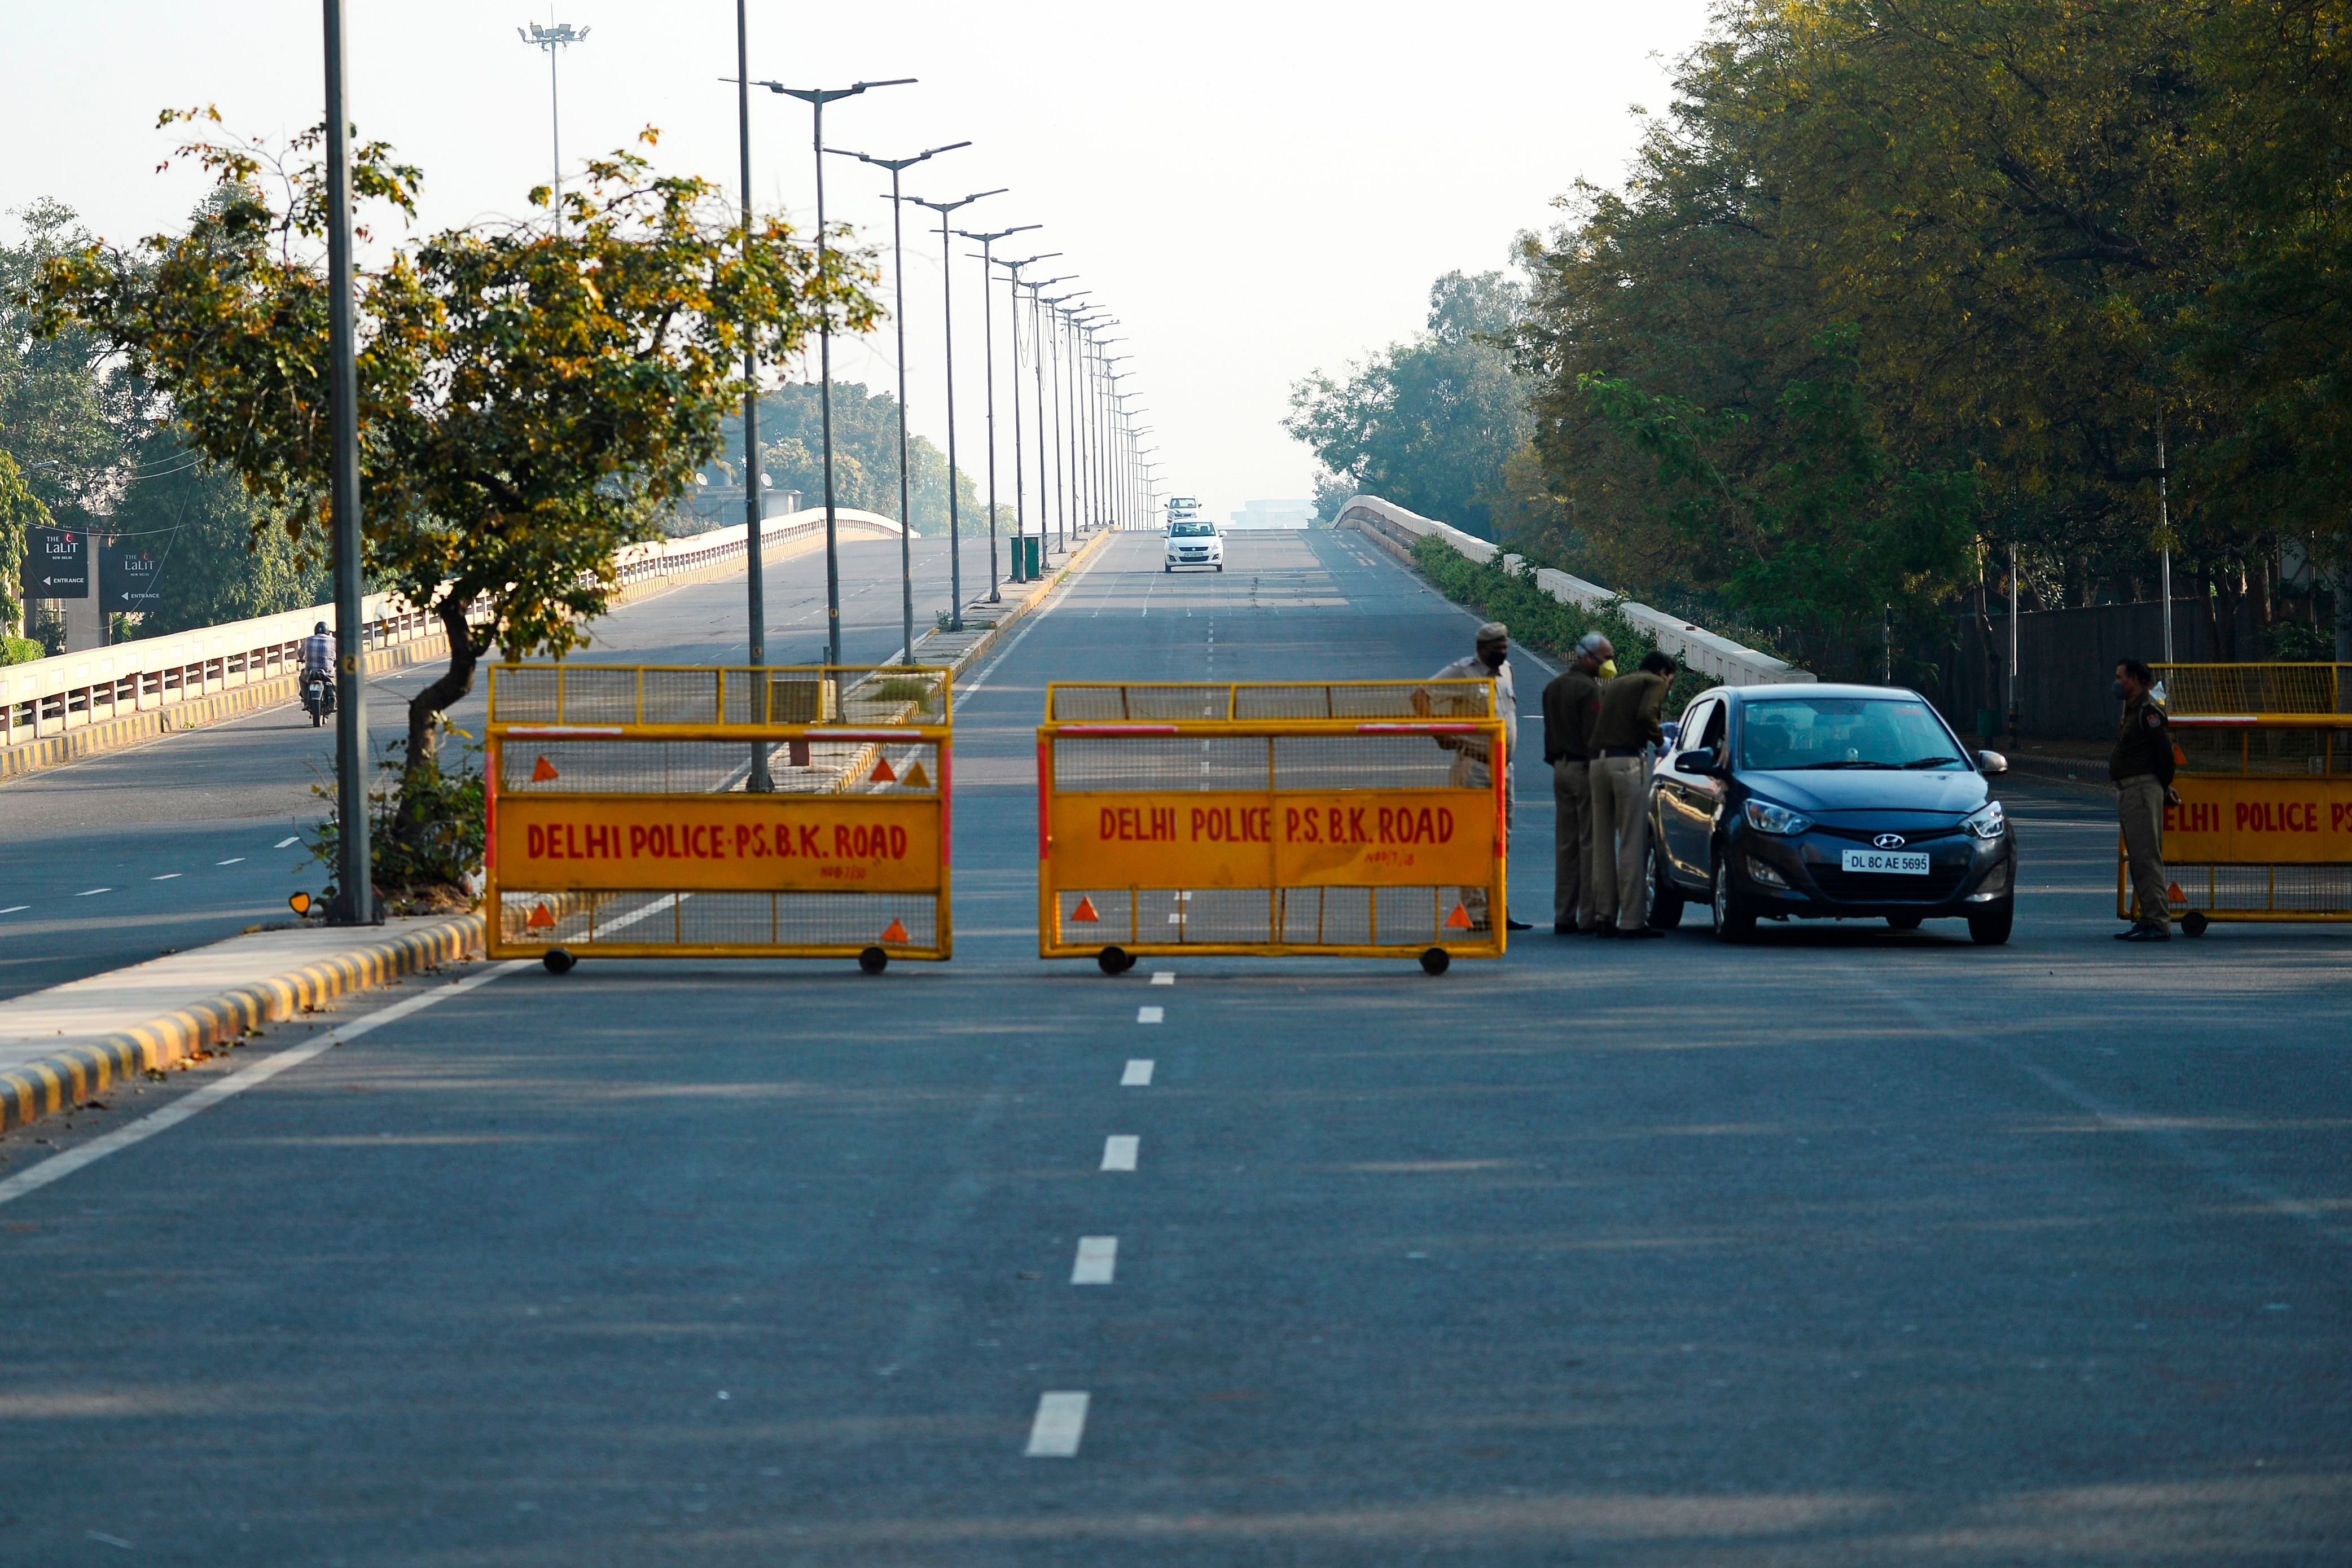 Police personnel speaks to a car driver on a deserted road during a one-day Janata (civil) curfew imposed amid concerns over the spread of the COVID-19 novel coronavirus, in New Delhi. (Credit: AFP)